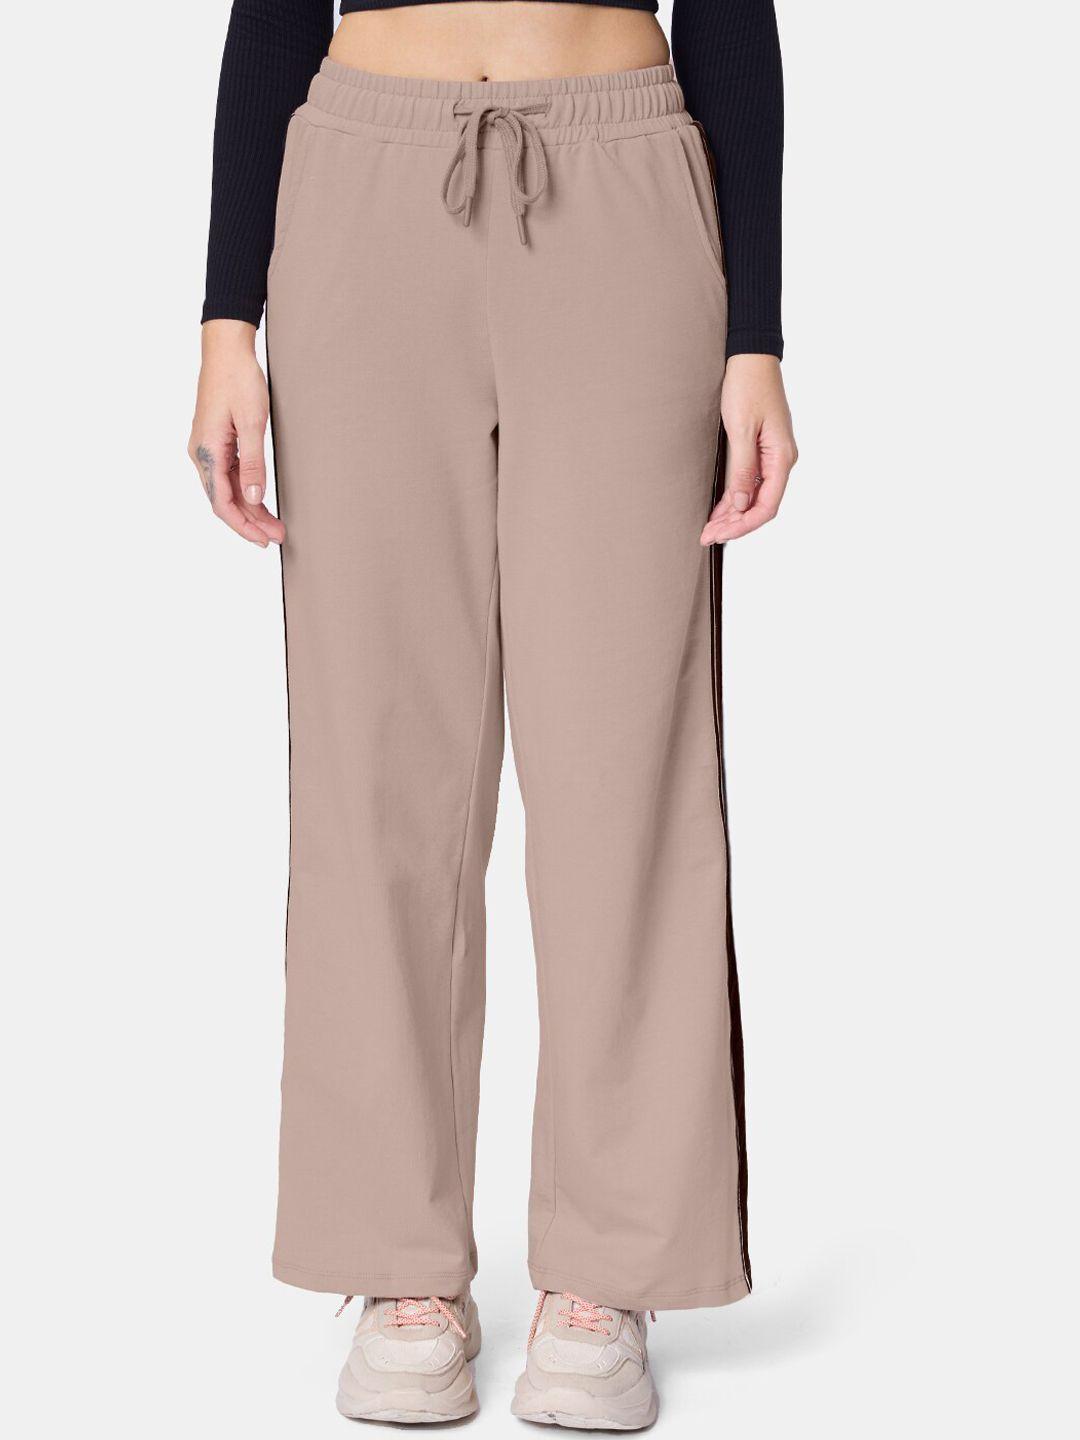 the souled store women brown solids: mushroom panel detail flared track pants